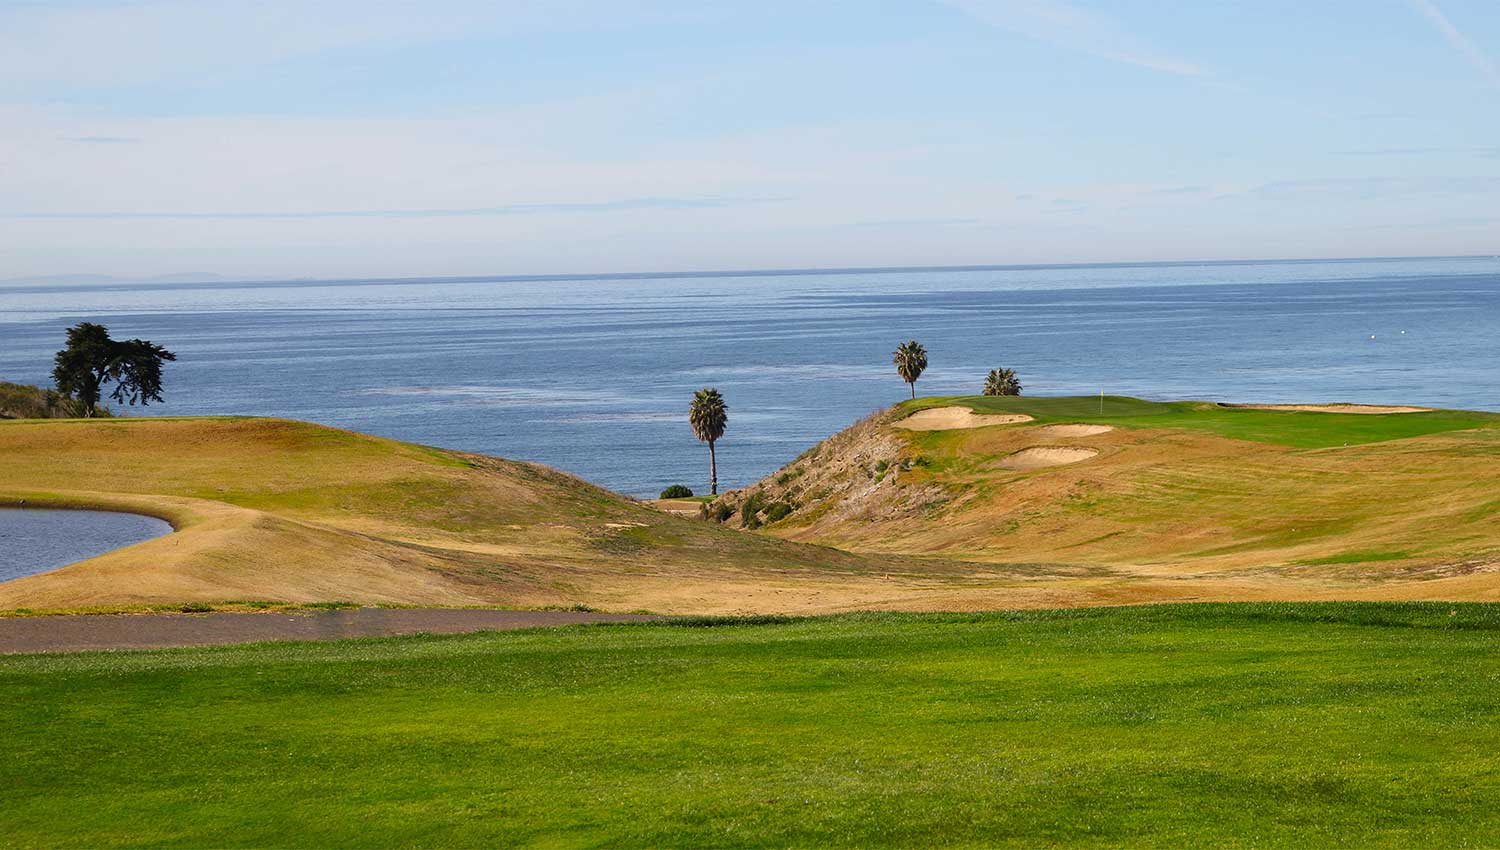 Sandpiper Golf course with view of ocean beyond